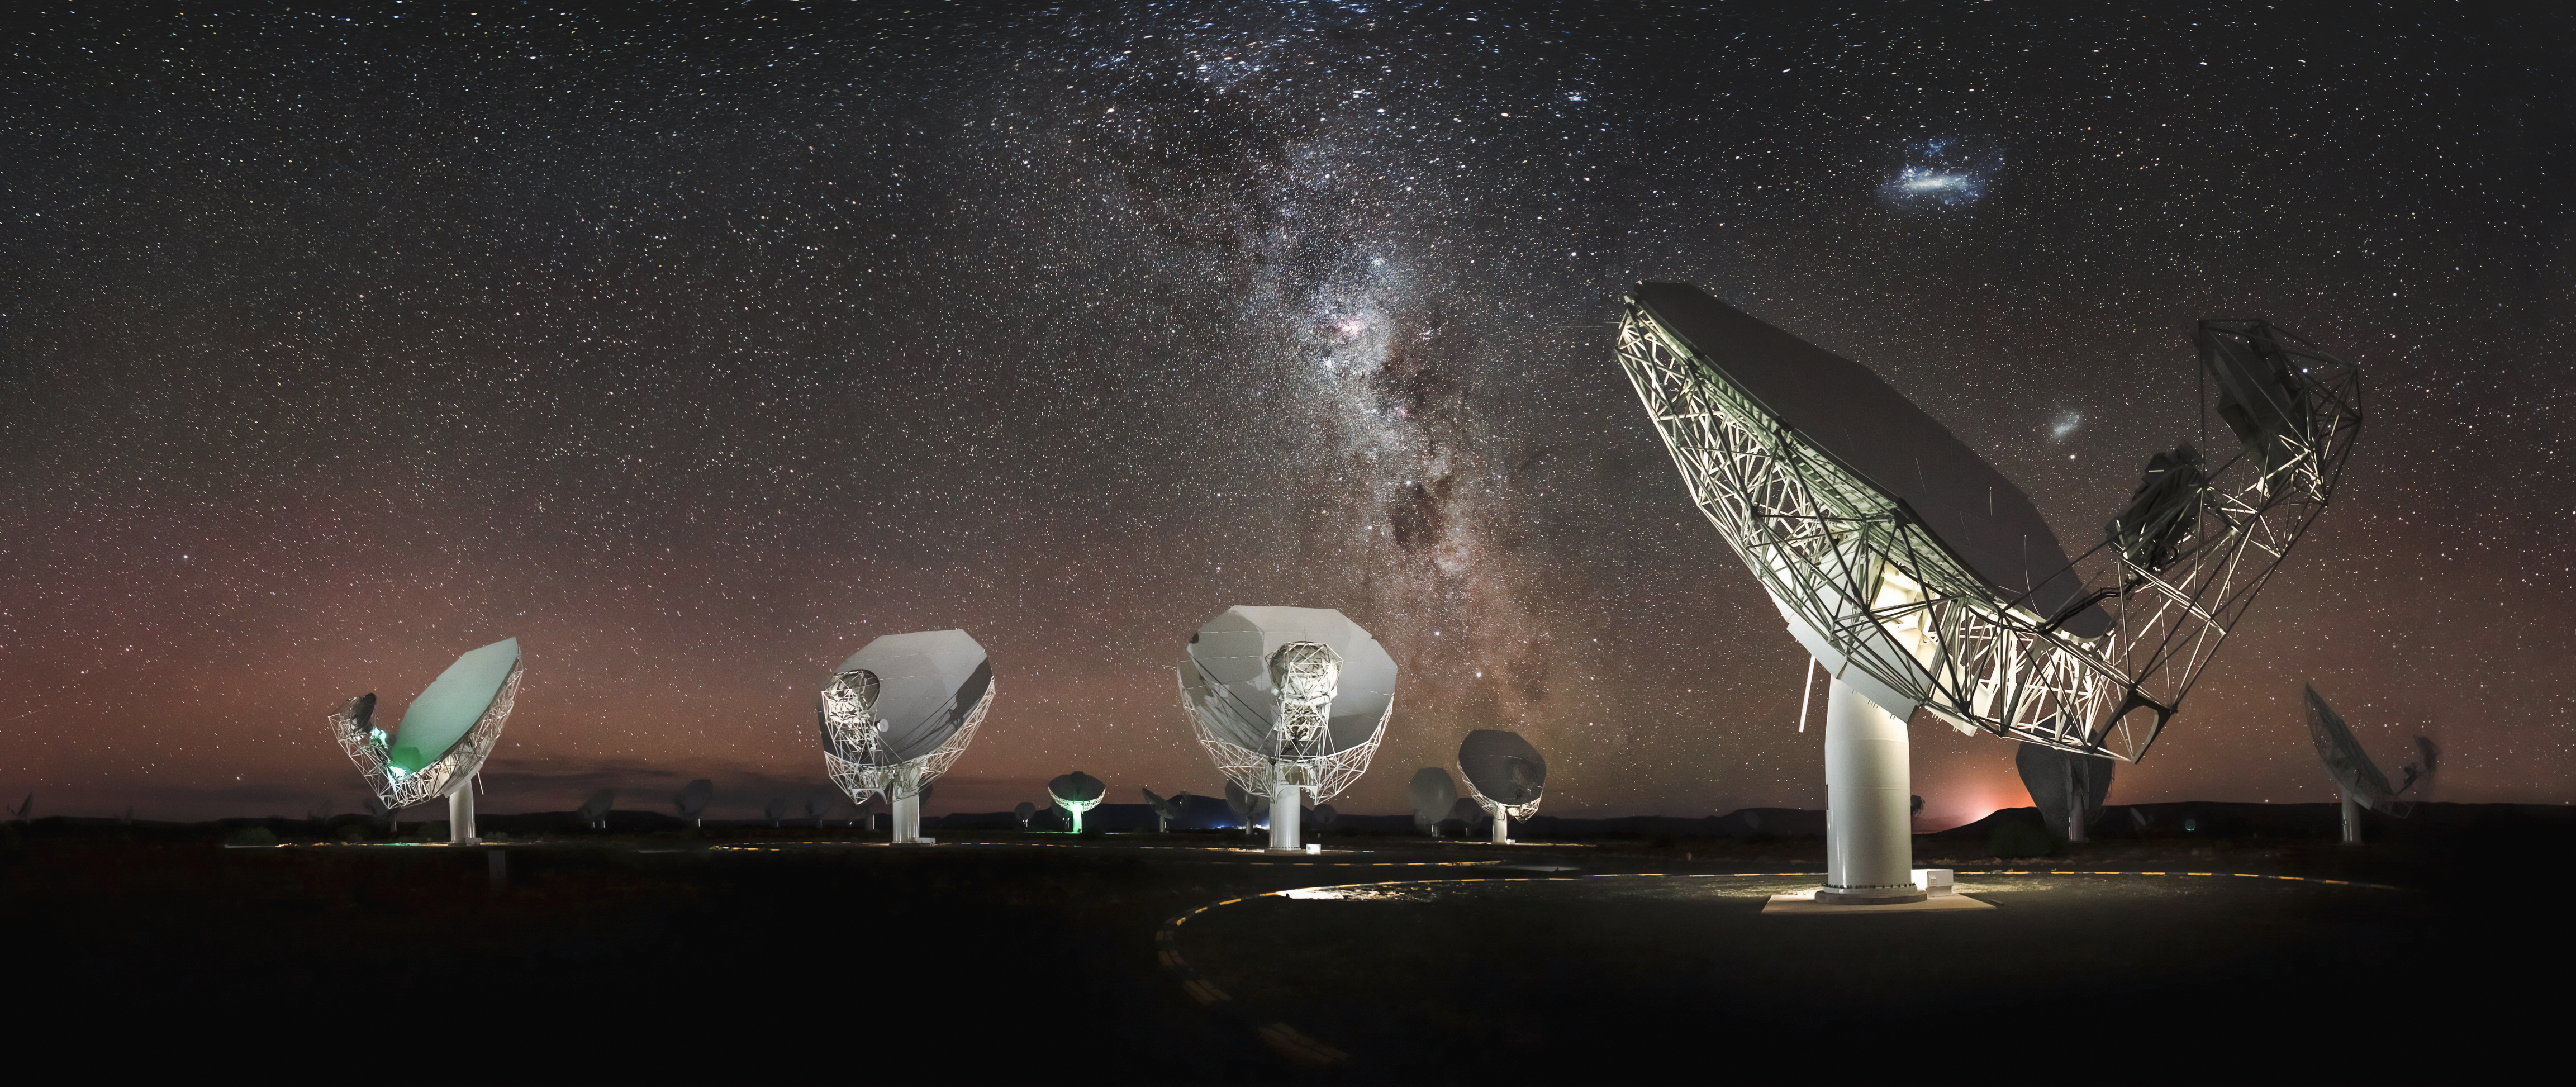 CPS Advocates for International Radio Astronomy Protection from Satellite Interference